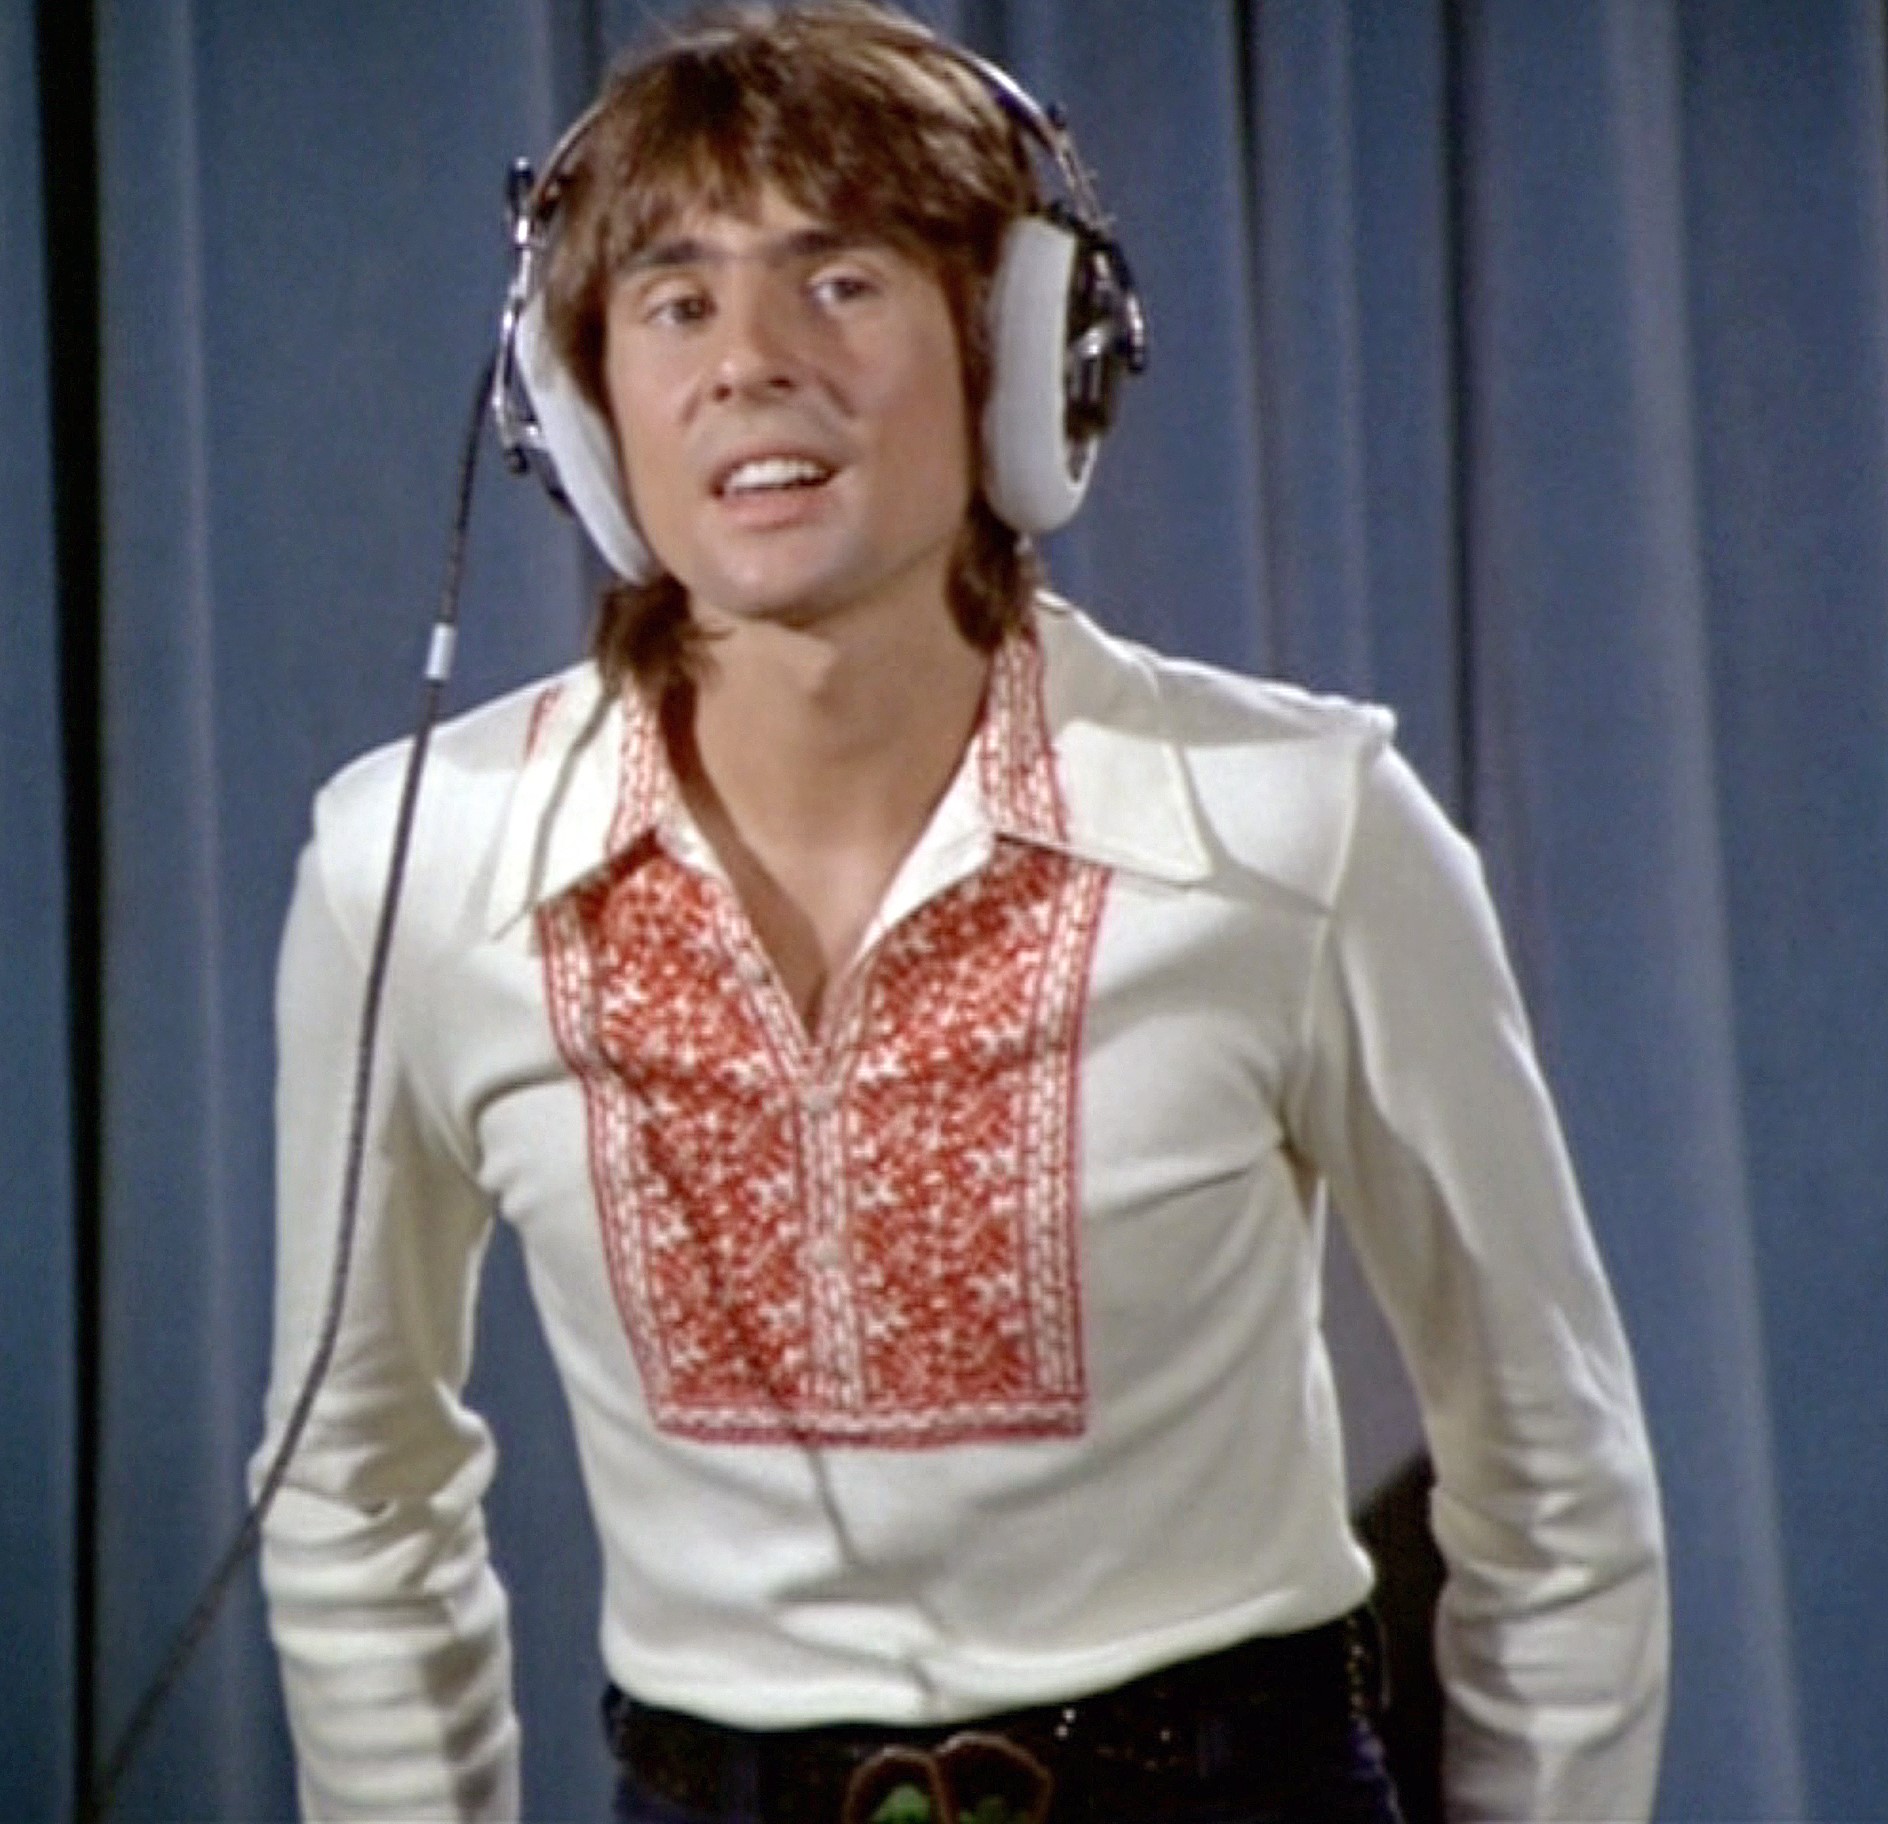 The Monkees' Davy Jones in front of a blue curtain